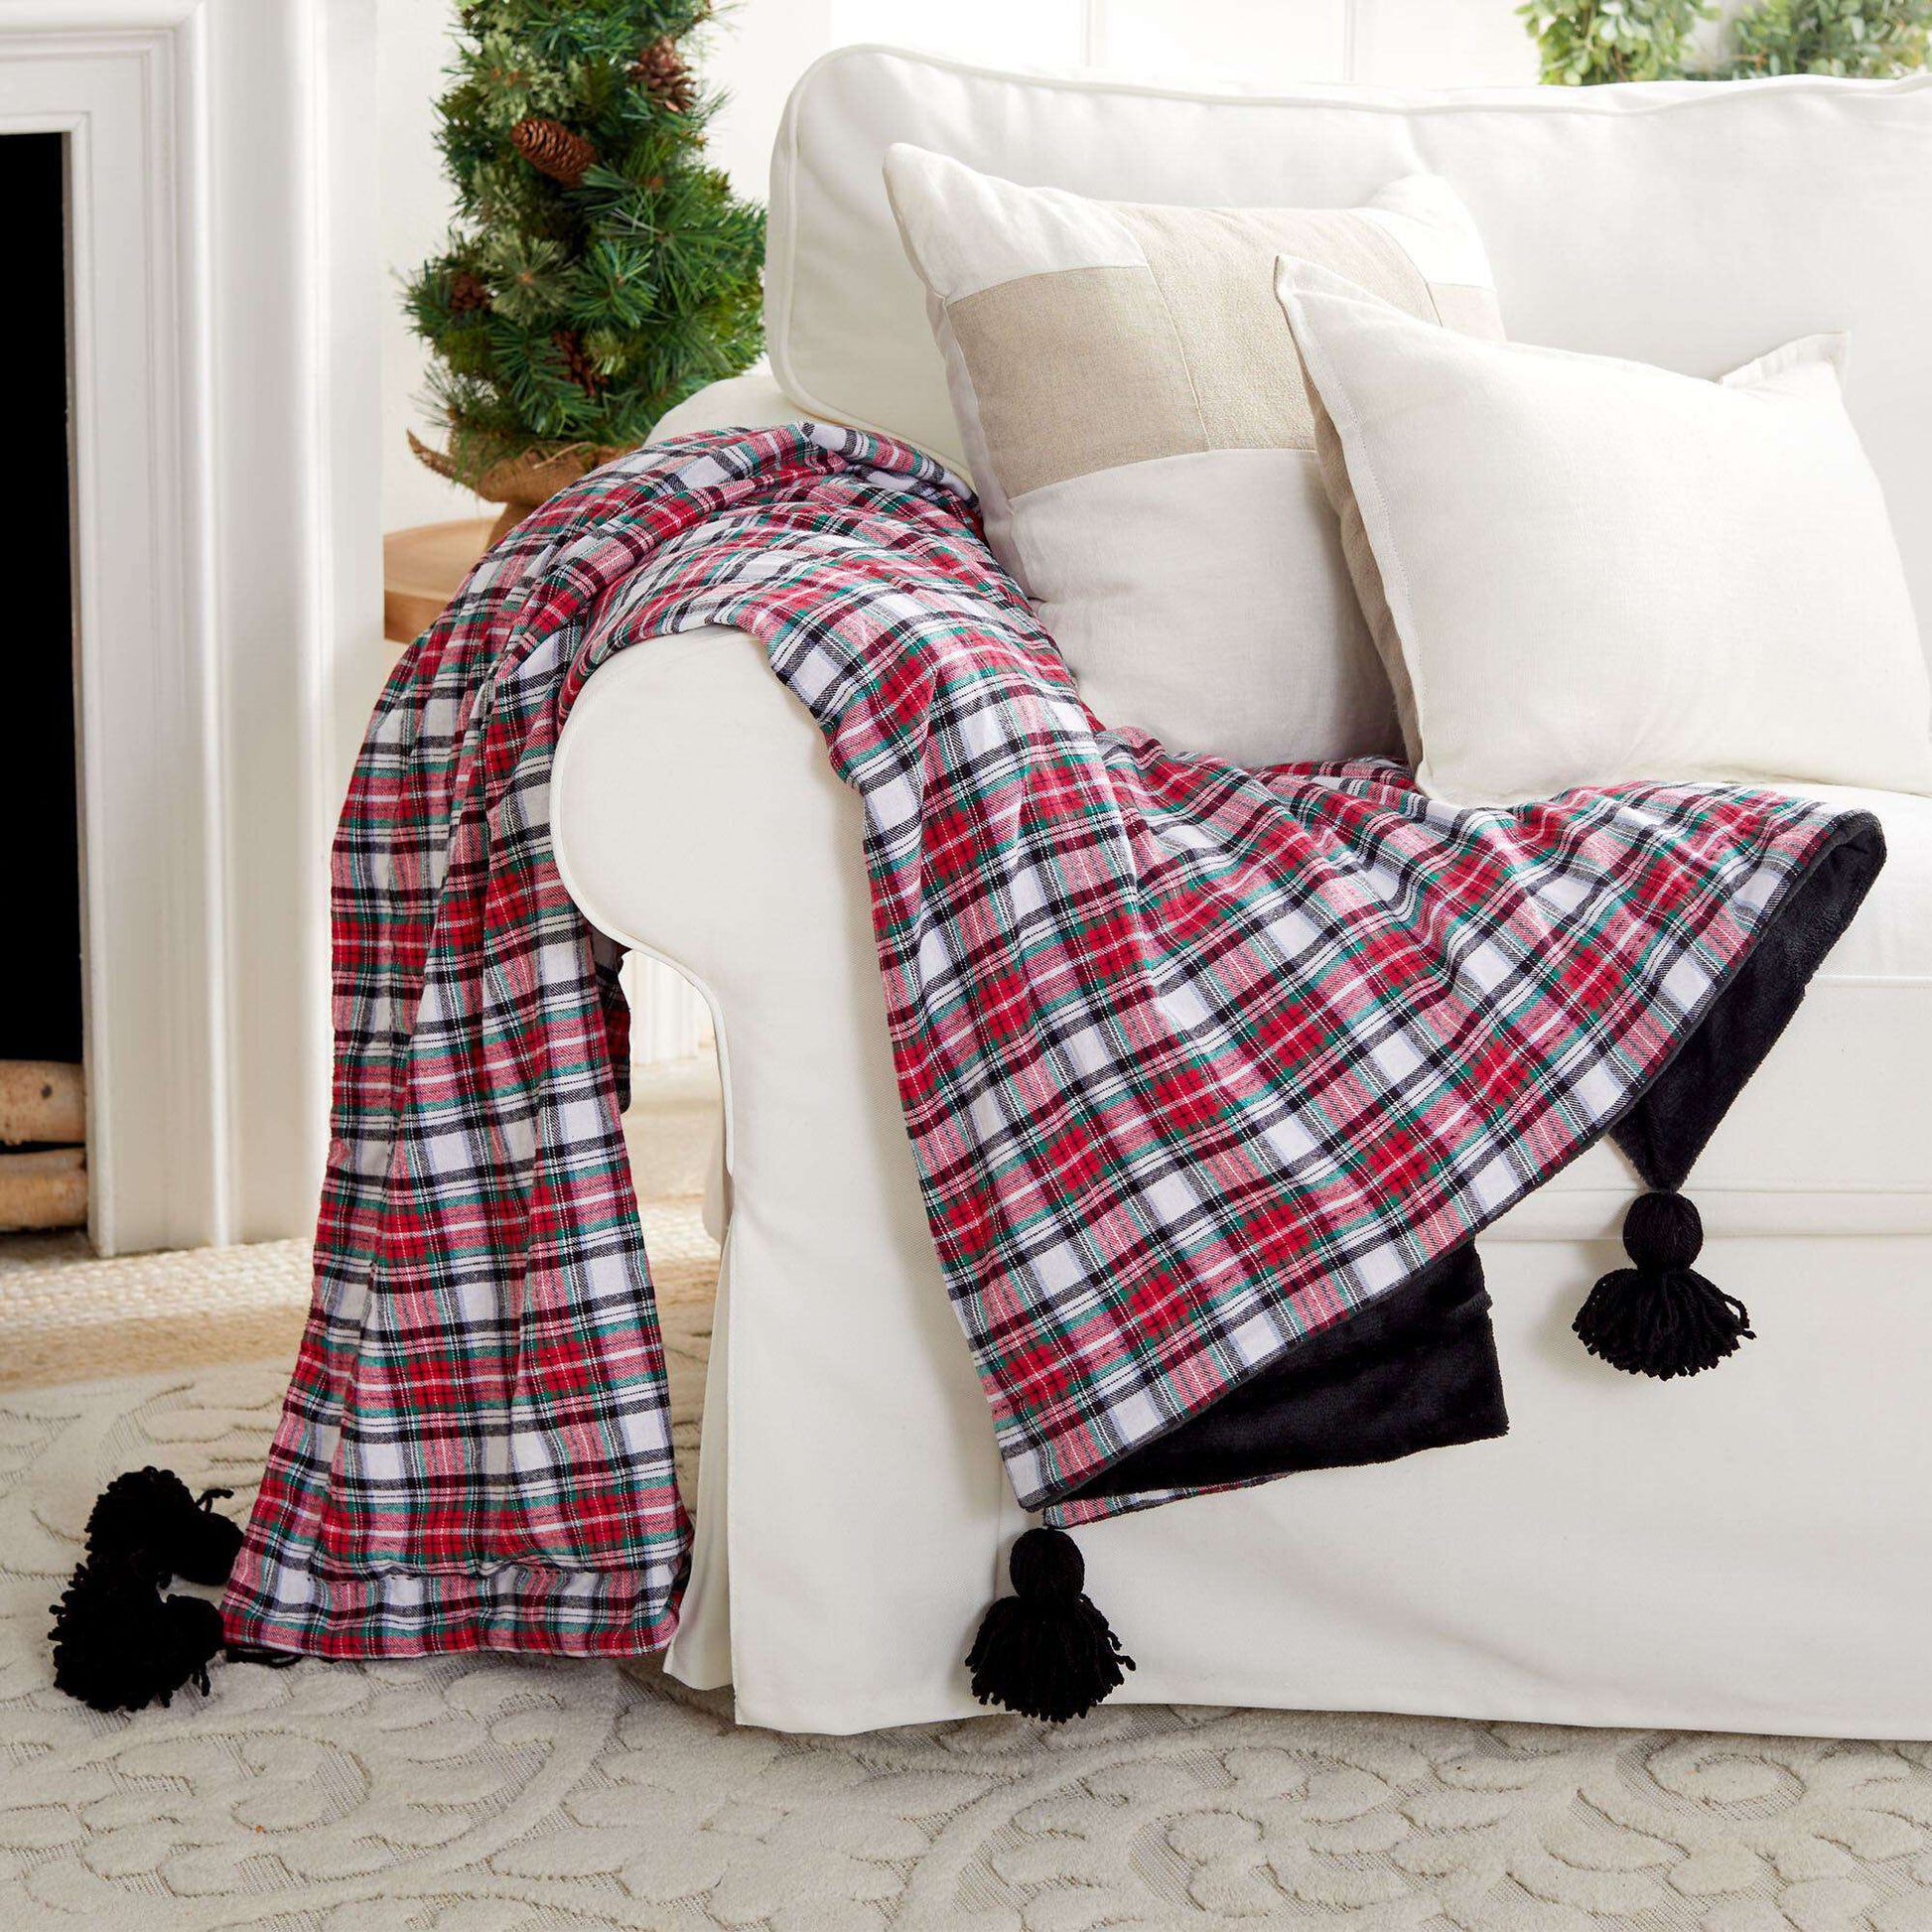 Free Coats Sewing & Clark Cuddle Plaid Throw Pattern